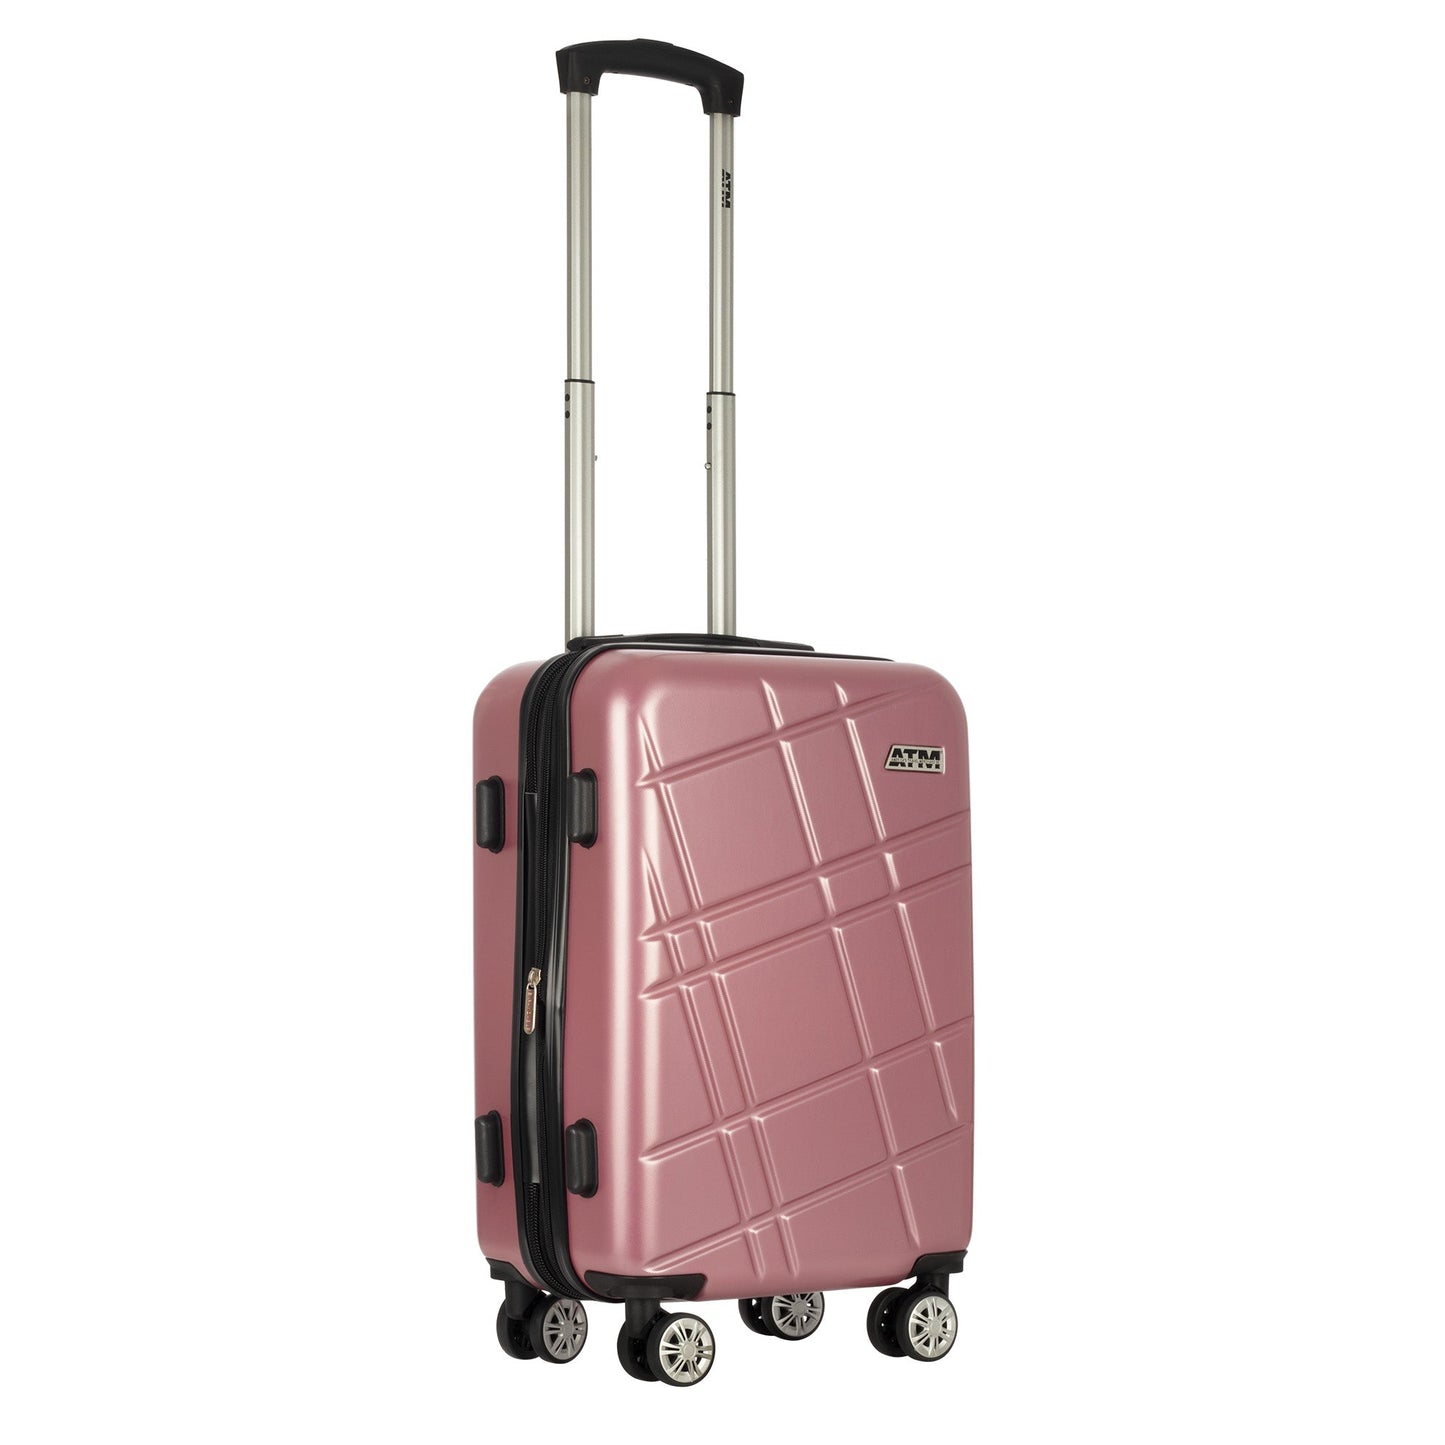 Soto collection luggage rose gold (20") Suitcase Lock Spinner